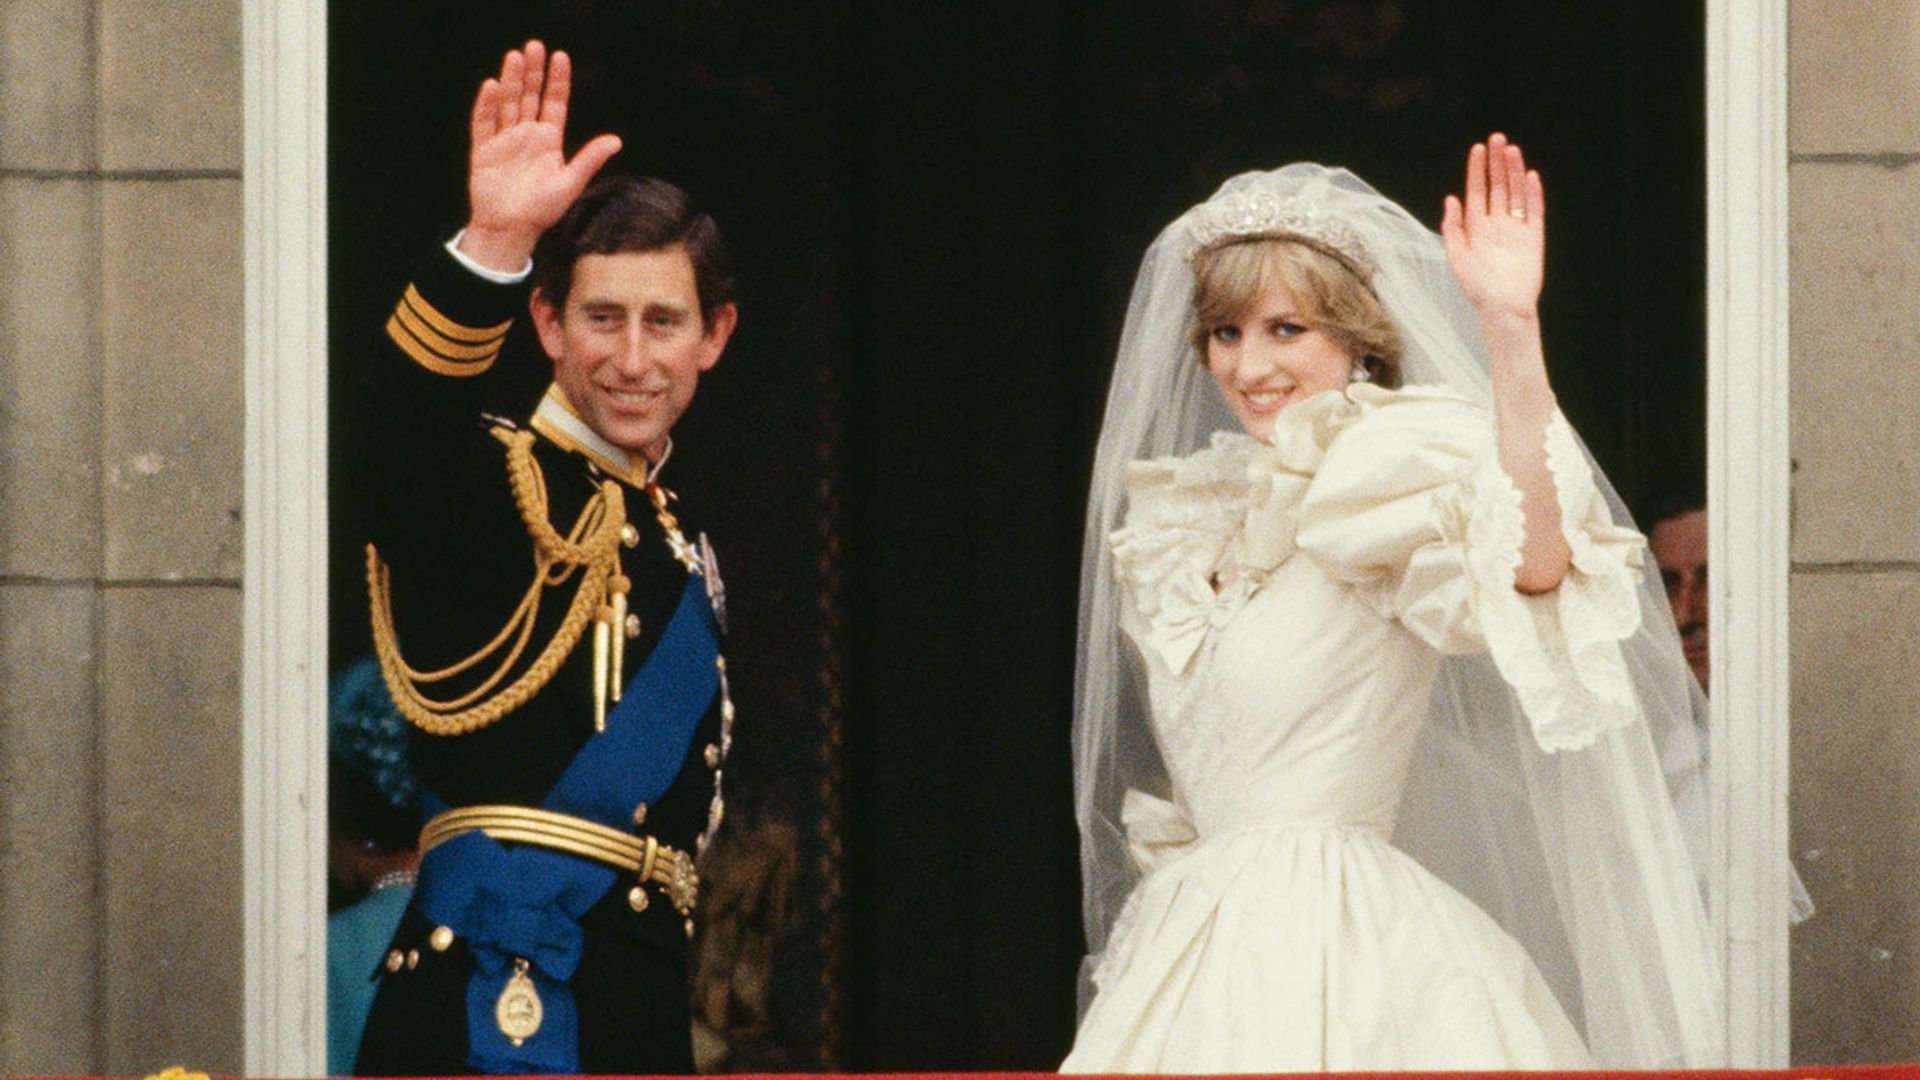 Princess Diana and Prince Charles both made mistakes while reciting their wedding vows